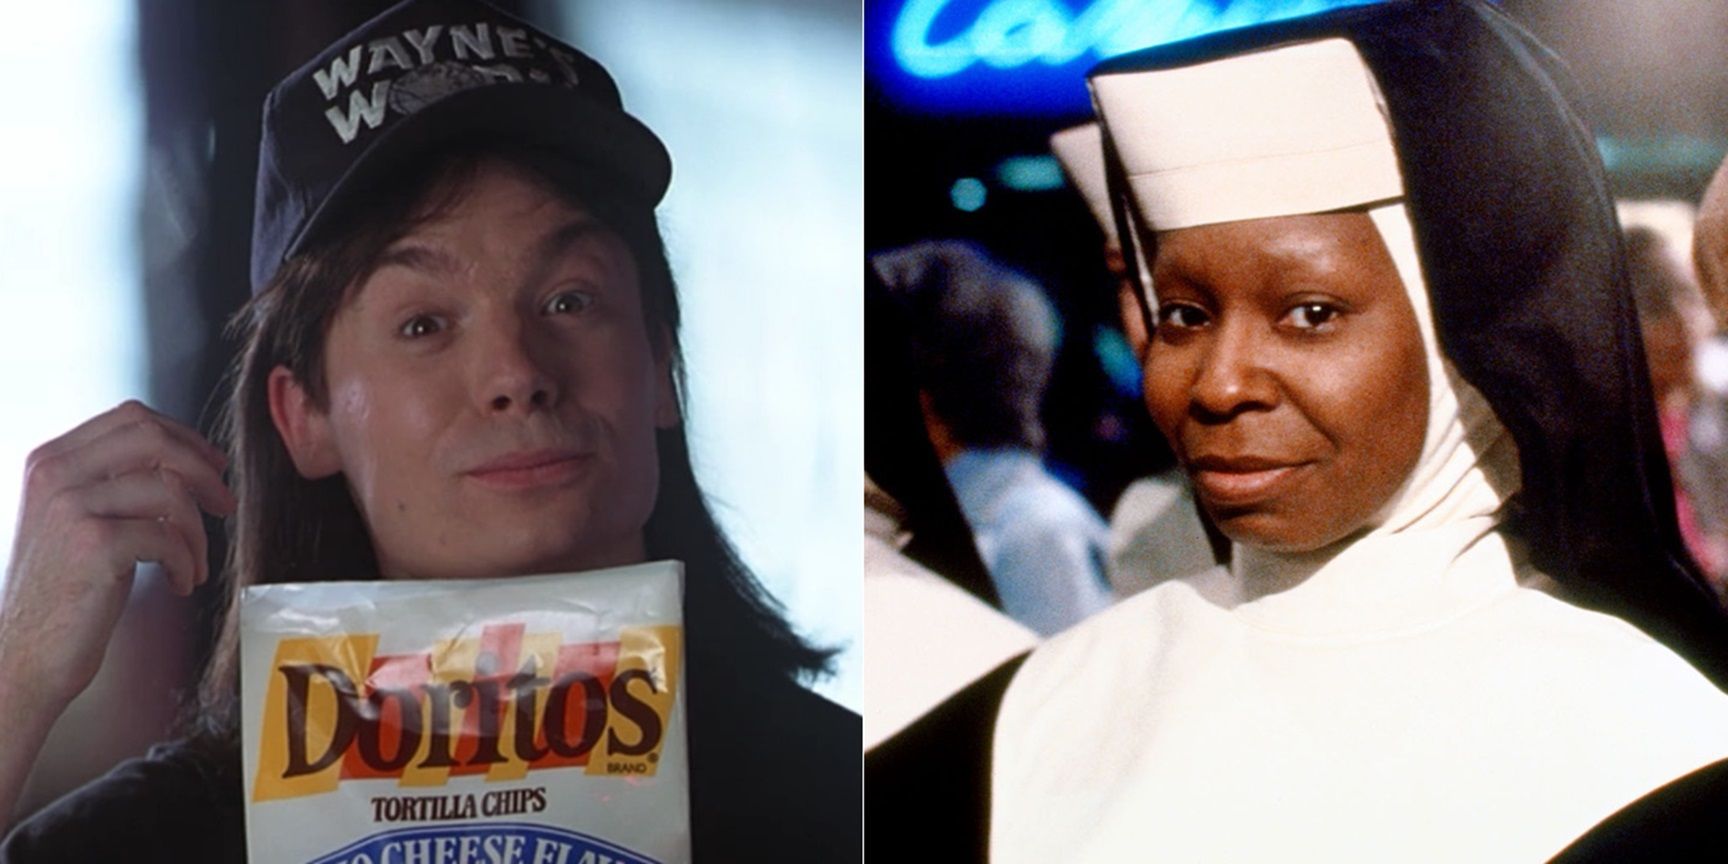 Split image of Mike Myers in Wayne's World and Whoopi Goldberg in Sister Act